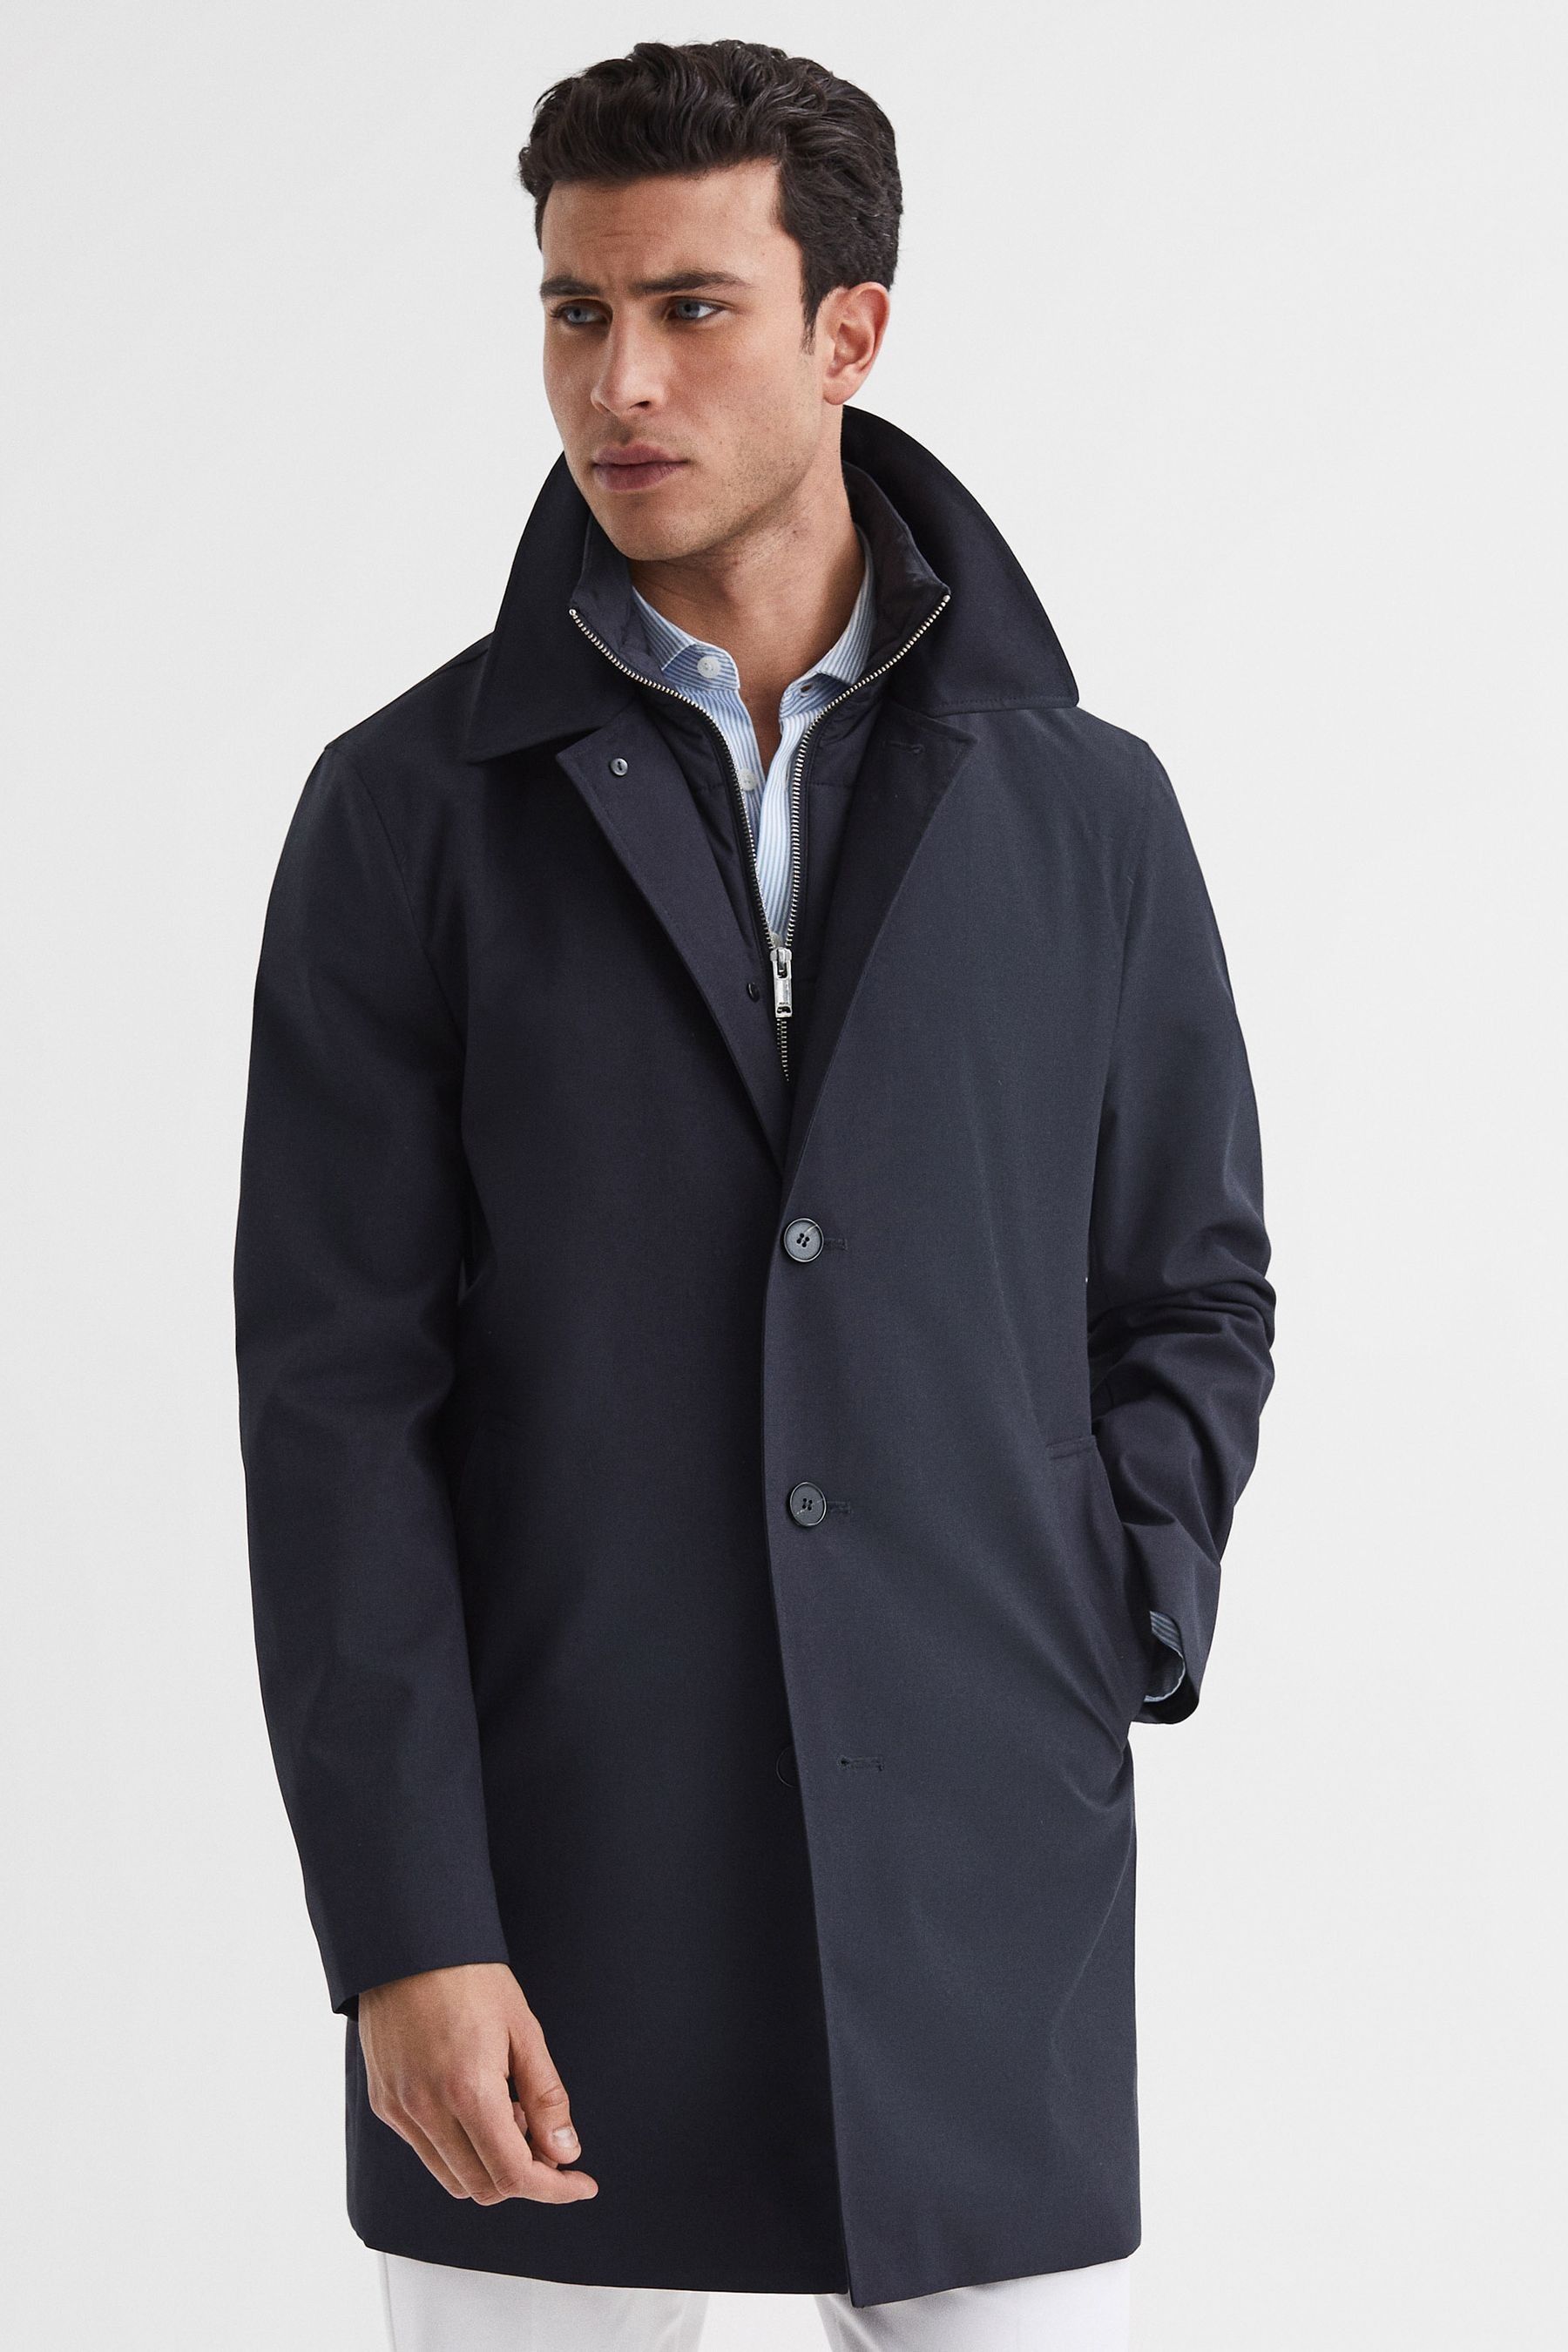 Buy Reiss Navy Perrin Mac With Removable Funnel-Neck Insert from the ...